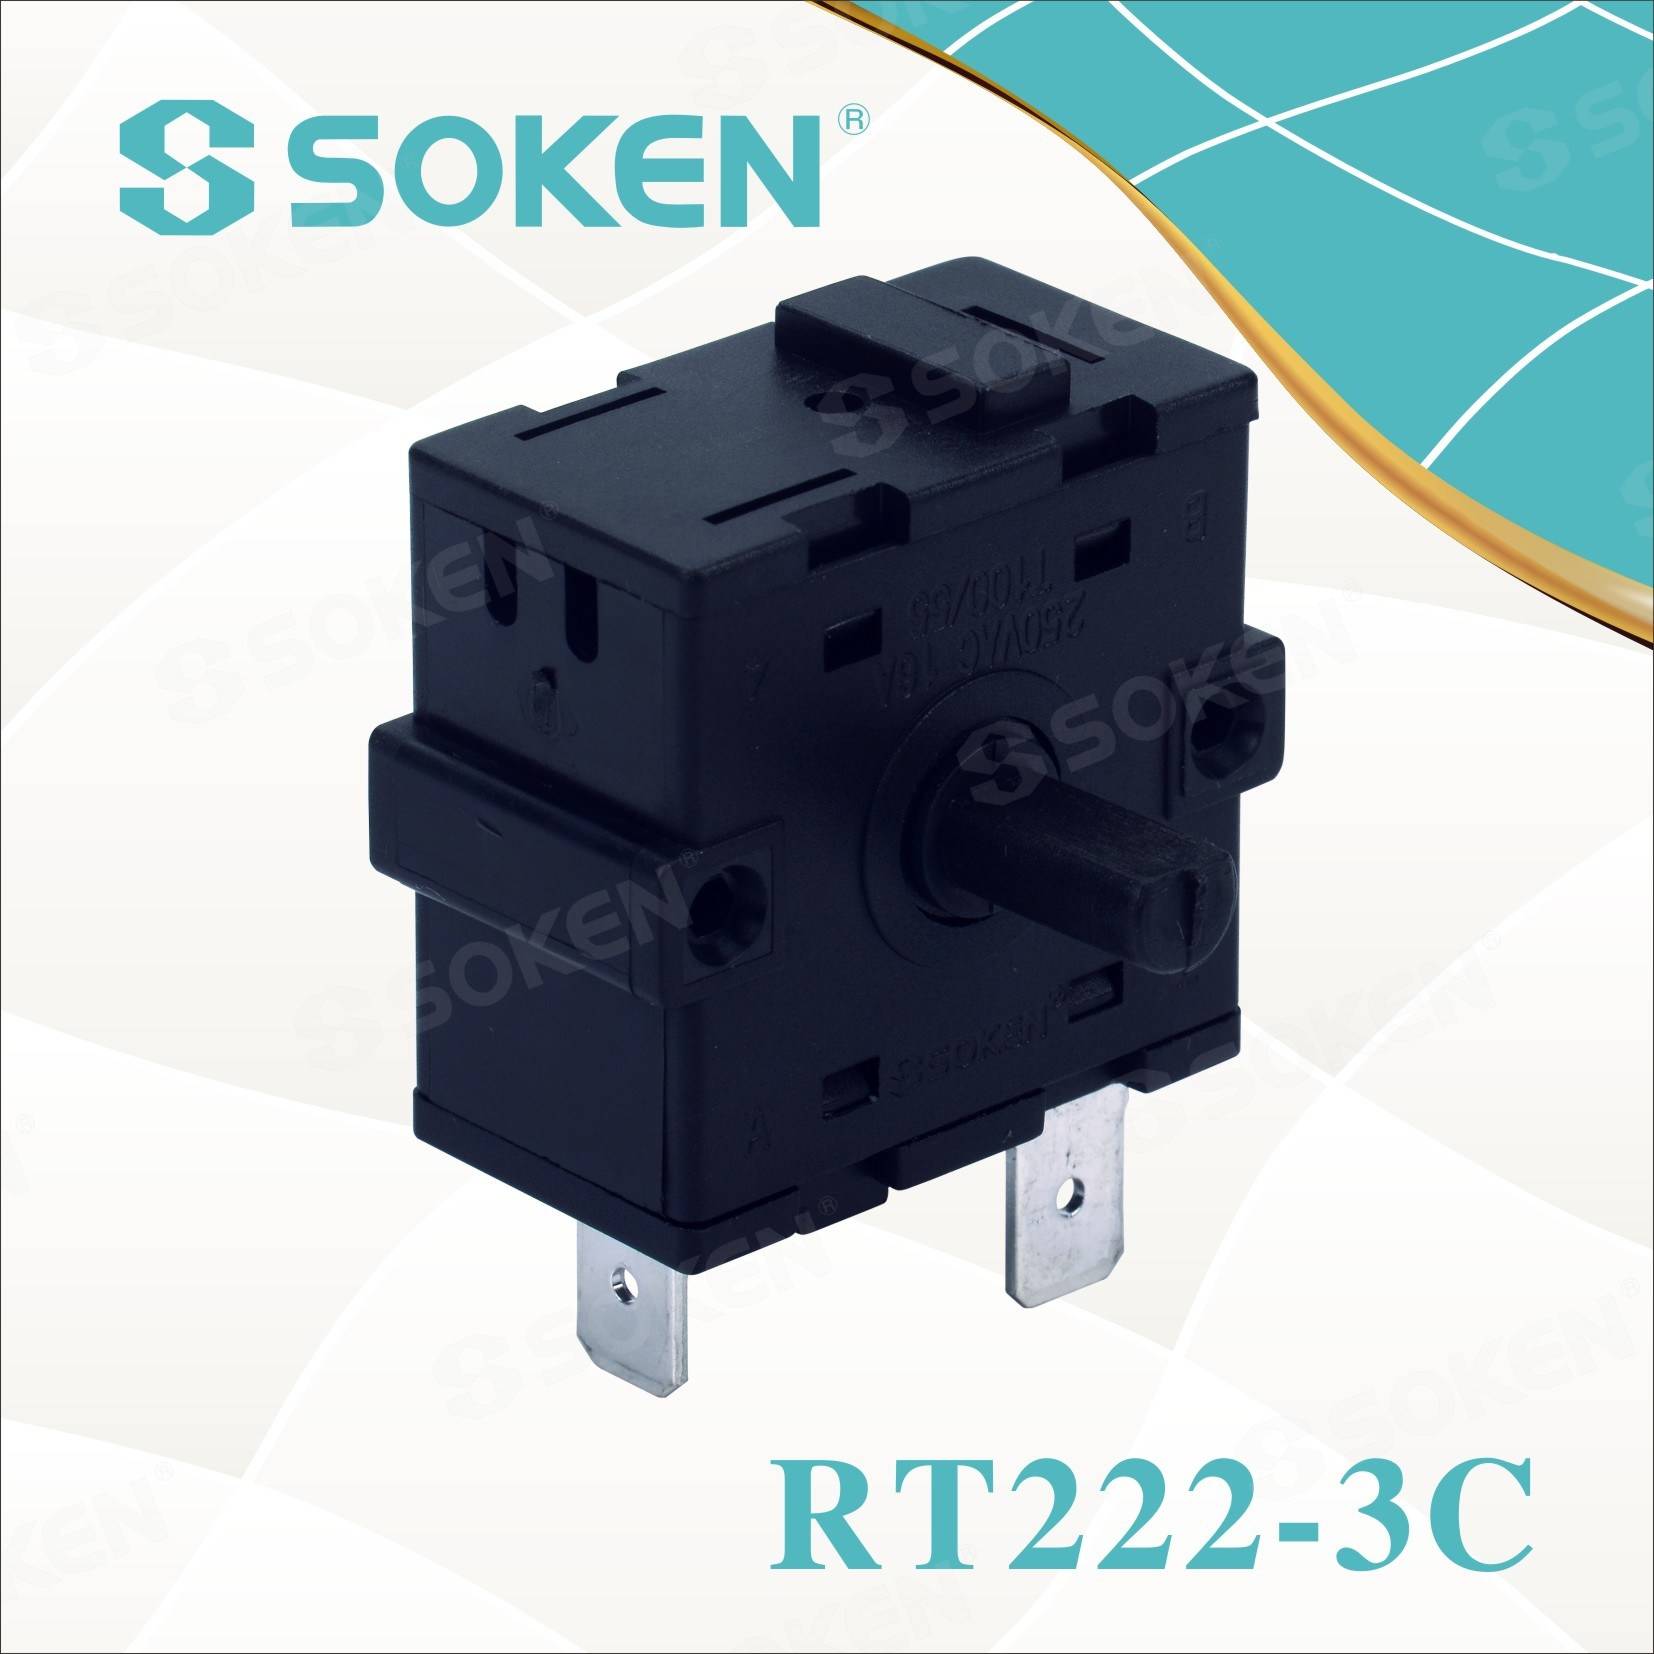 Discount Price Rechargeable Led Railway Light -
 Soken Rotary Switch for Oven – Master Soken Electrical